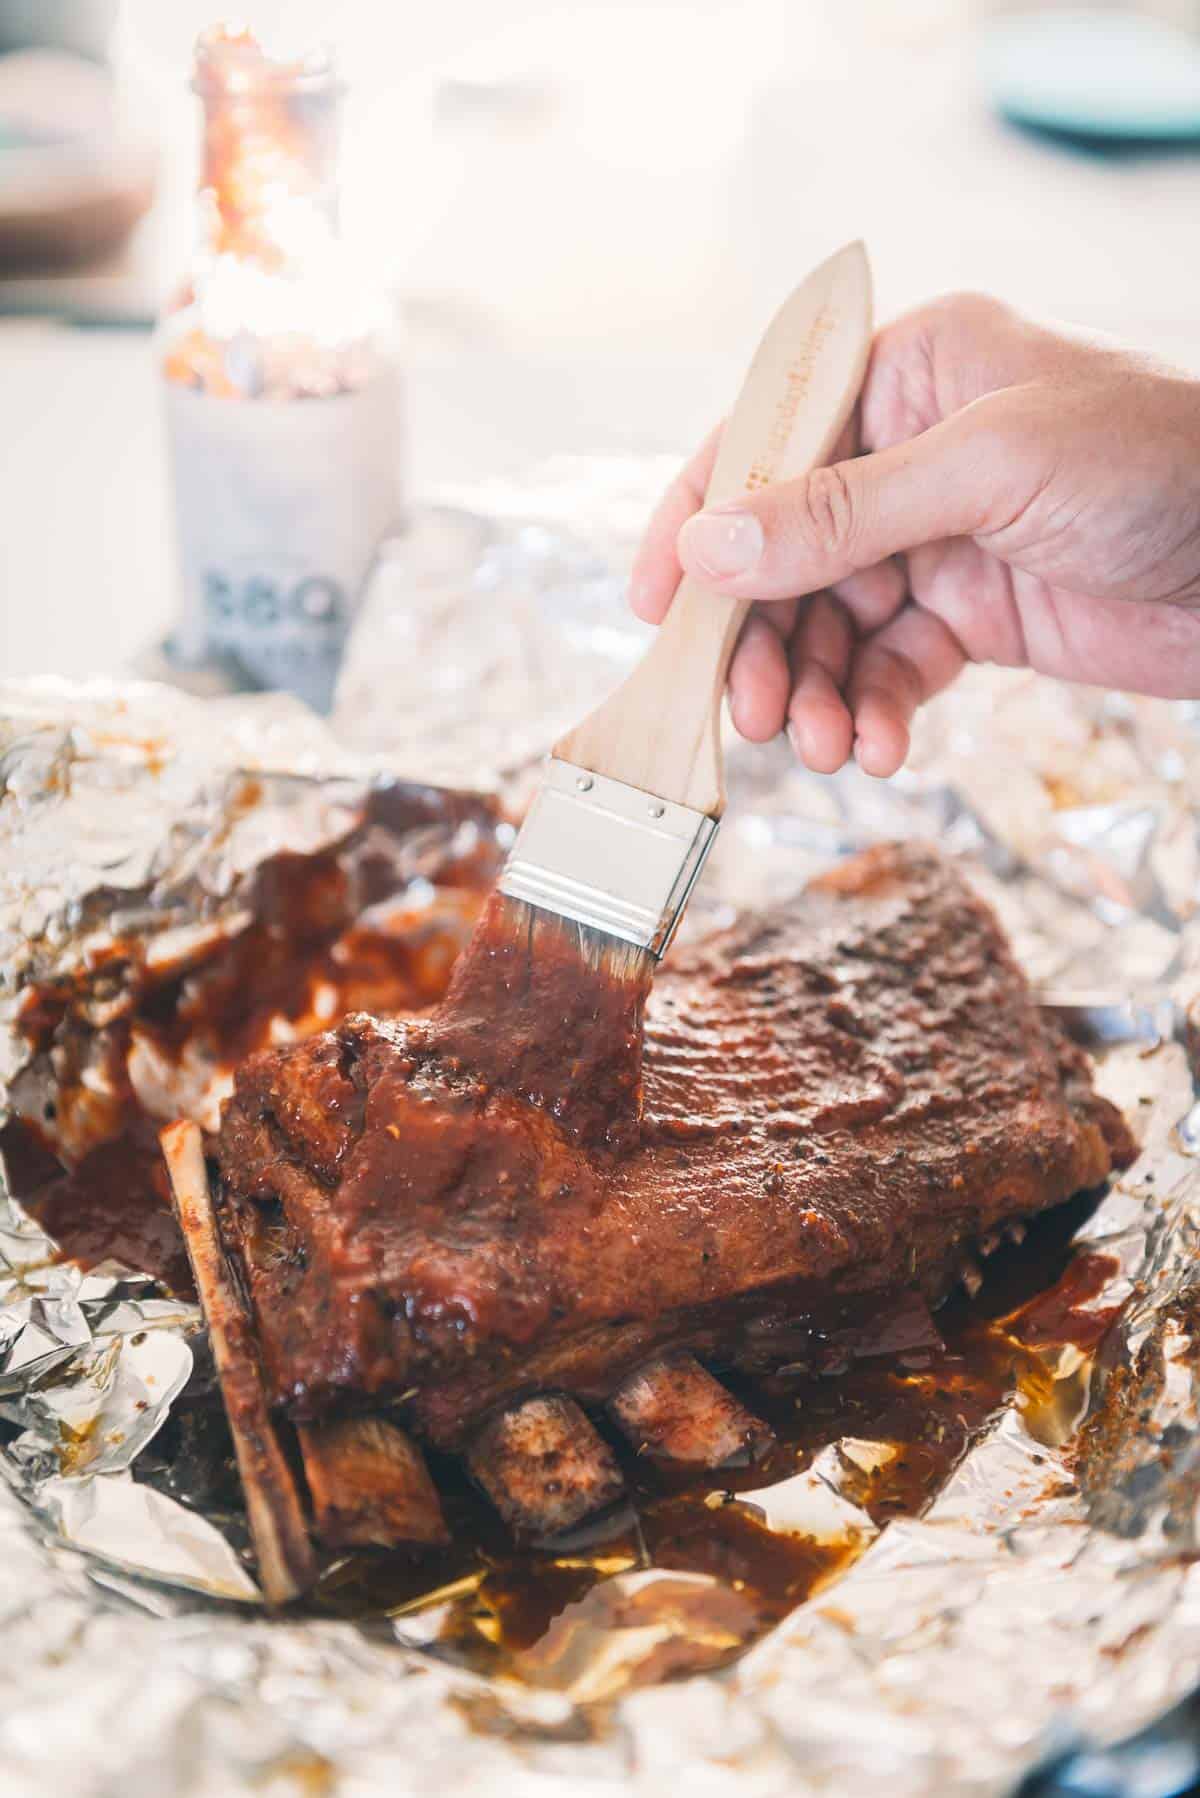 Bbq ribs on foil with a basting brush.